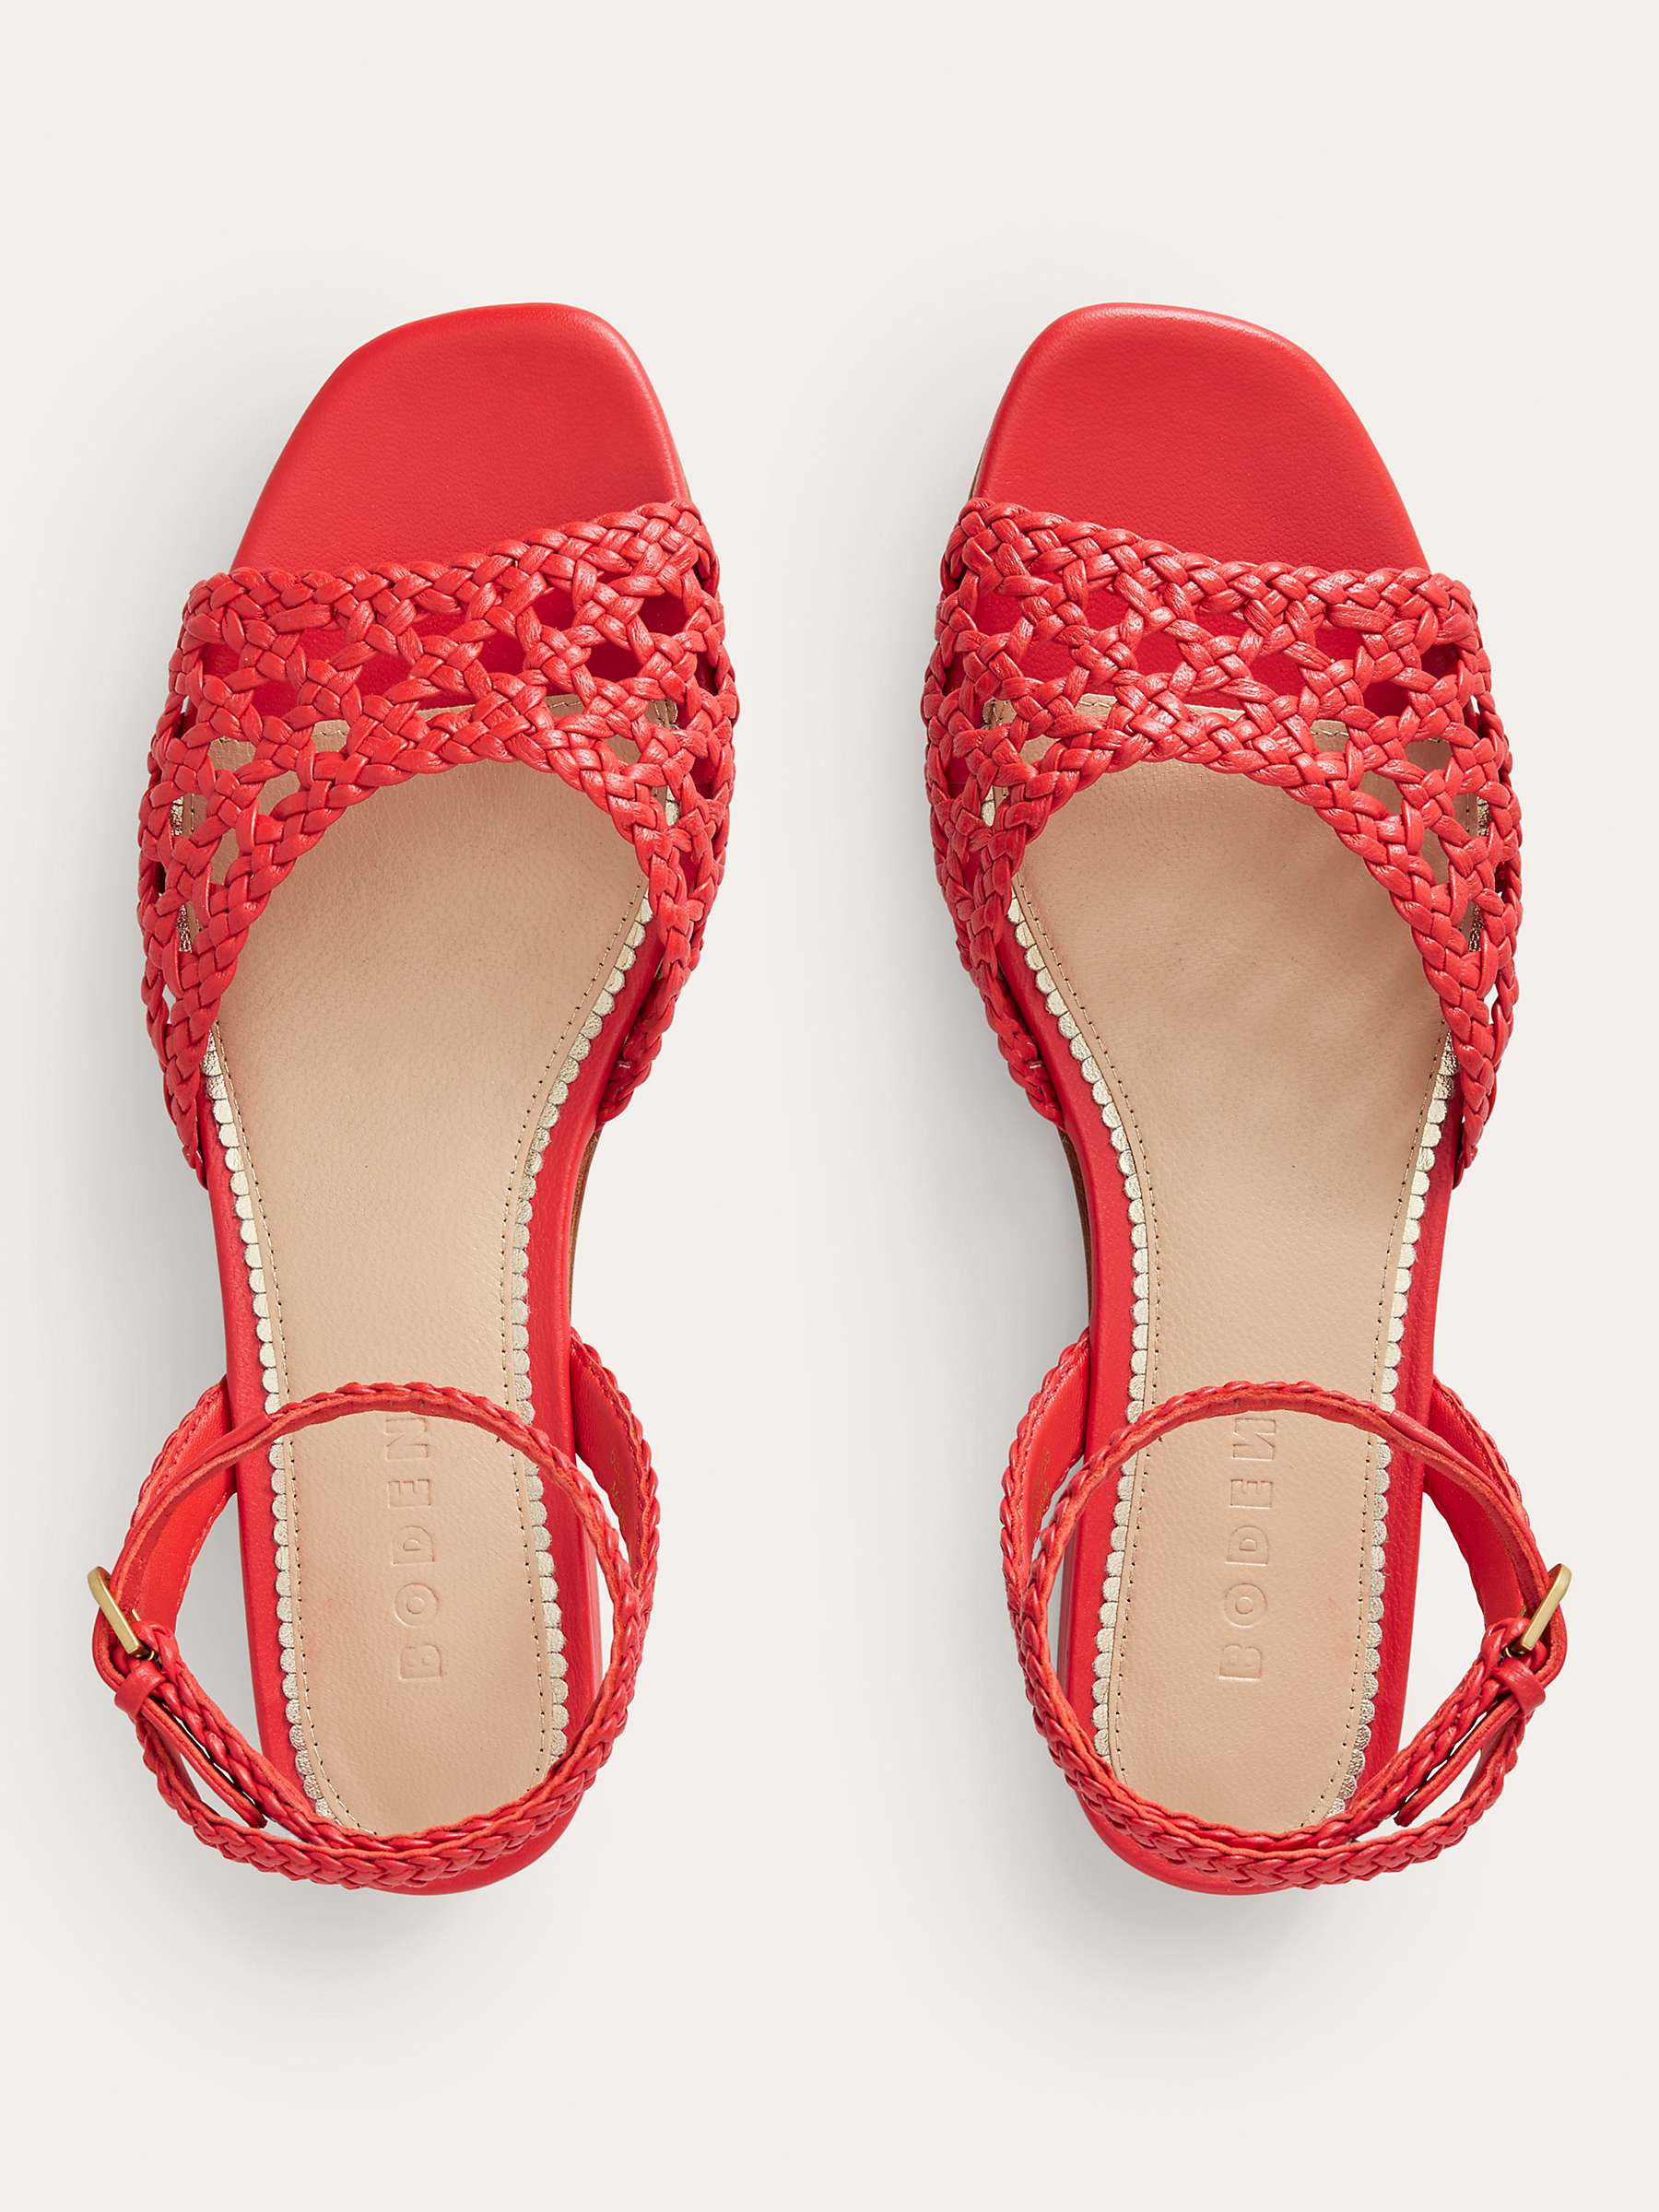 Buy Boden Woven Flat Sandals, Post Box Red Online at johnlewis.com